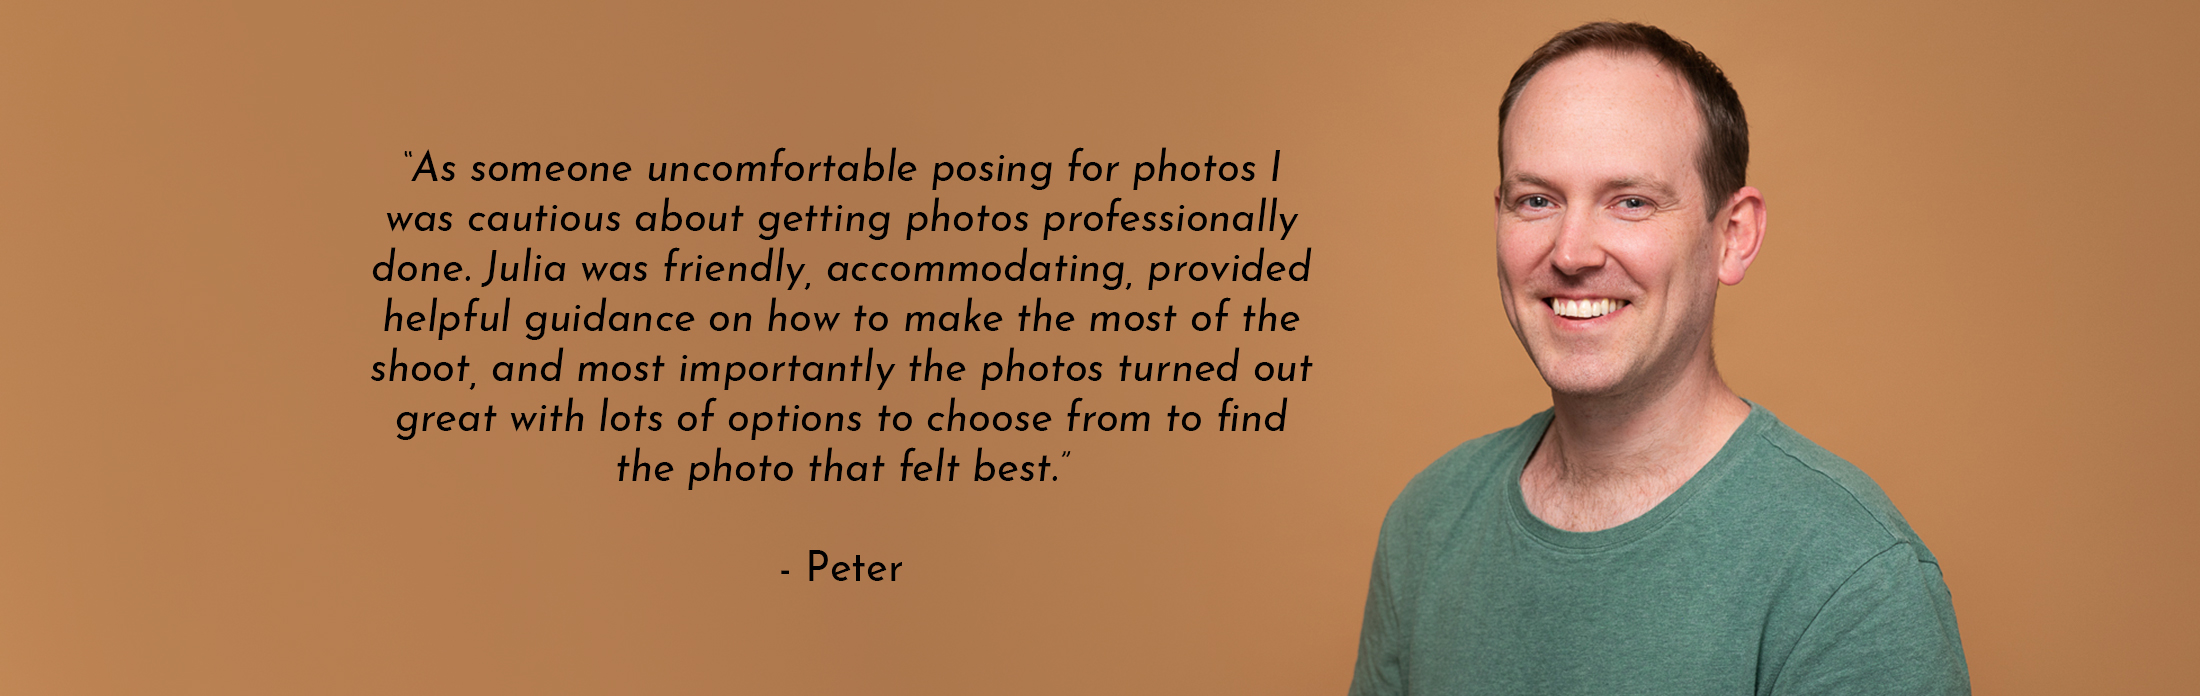 Text Reads: “As someone uncomfortable posing for photos I was cautious about getting photos professionally done. Julia was friendly, accommodating, provided helpful guidance on how to make the most of the shoot, and most importantly the photos turned out great with lots of options to choose from to find the photo that felt best.” - Peter